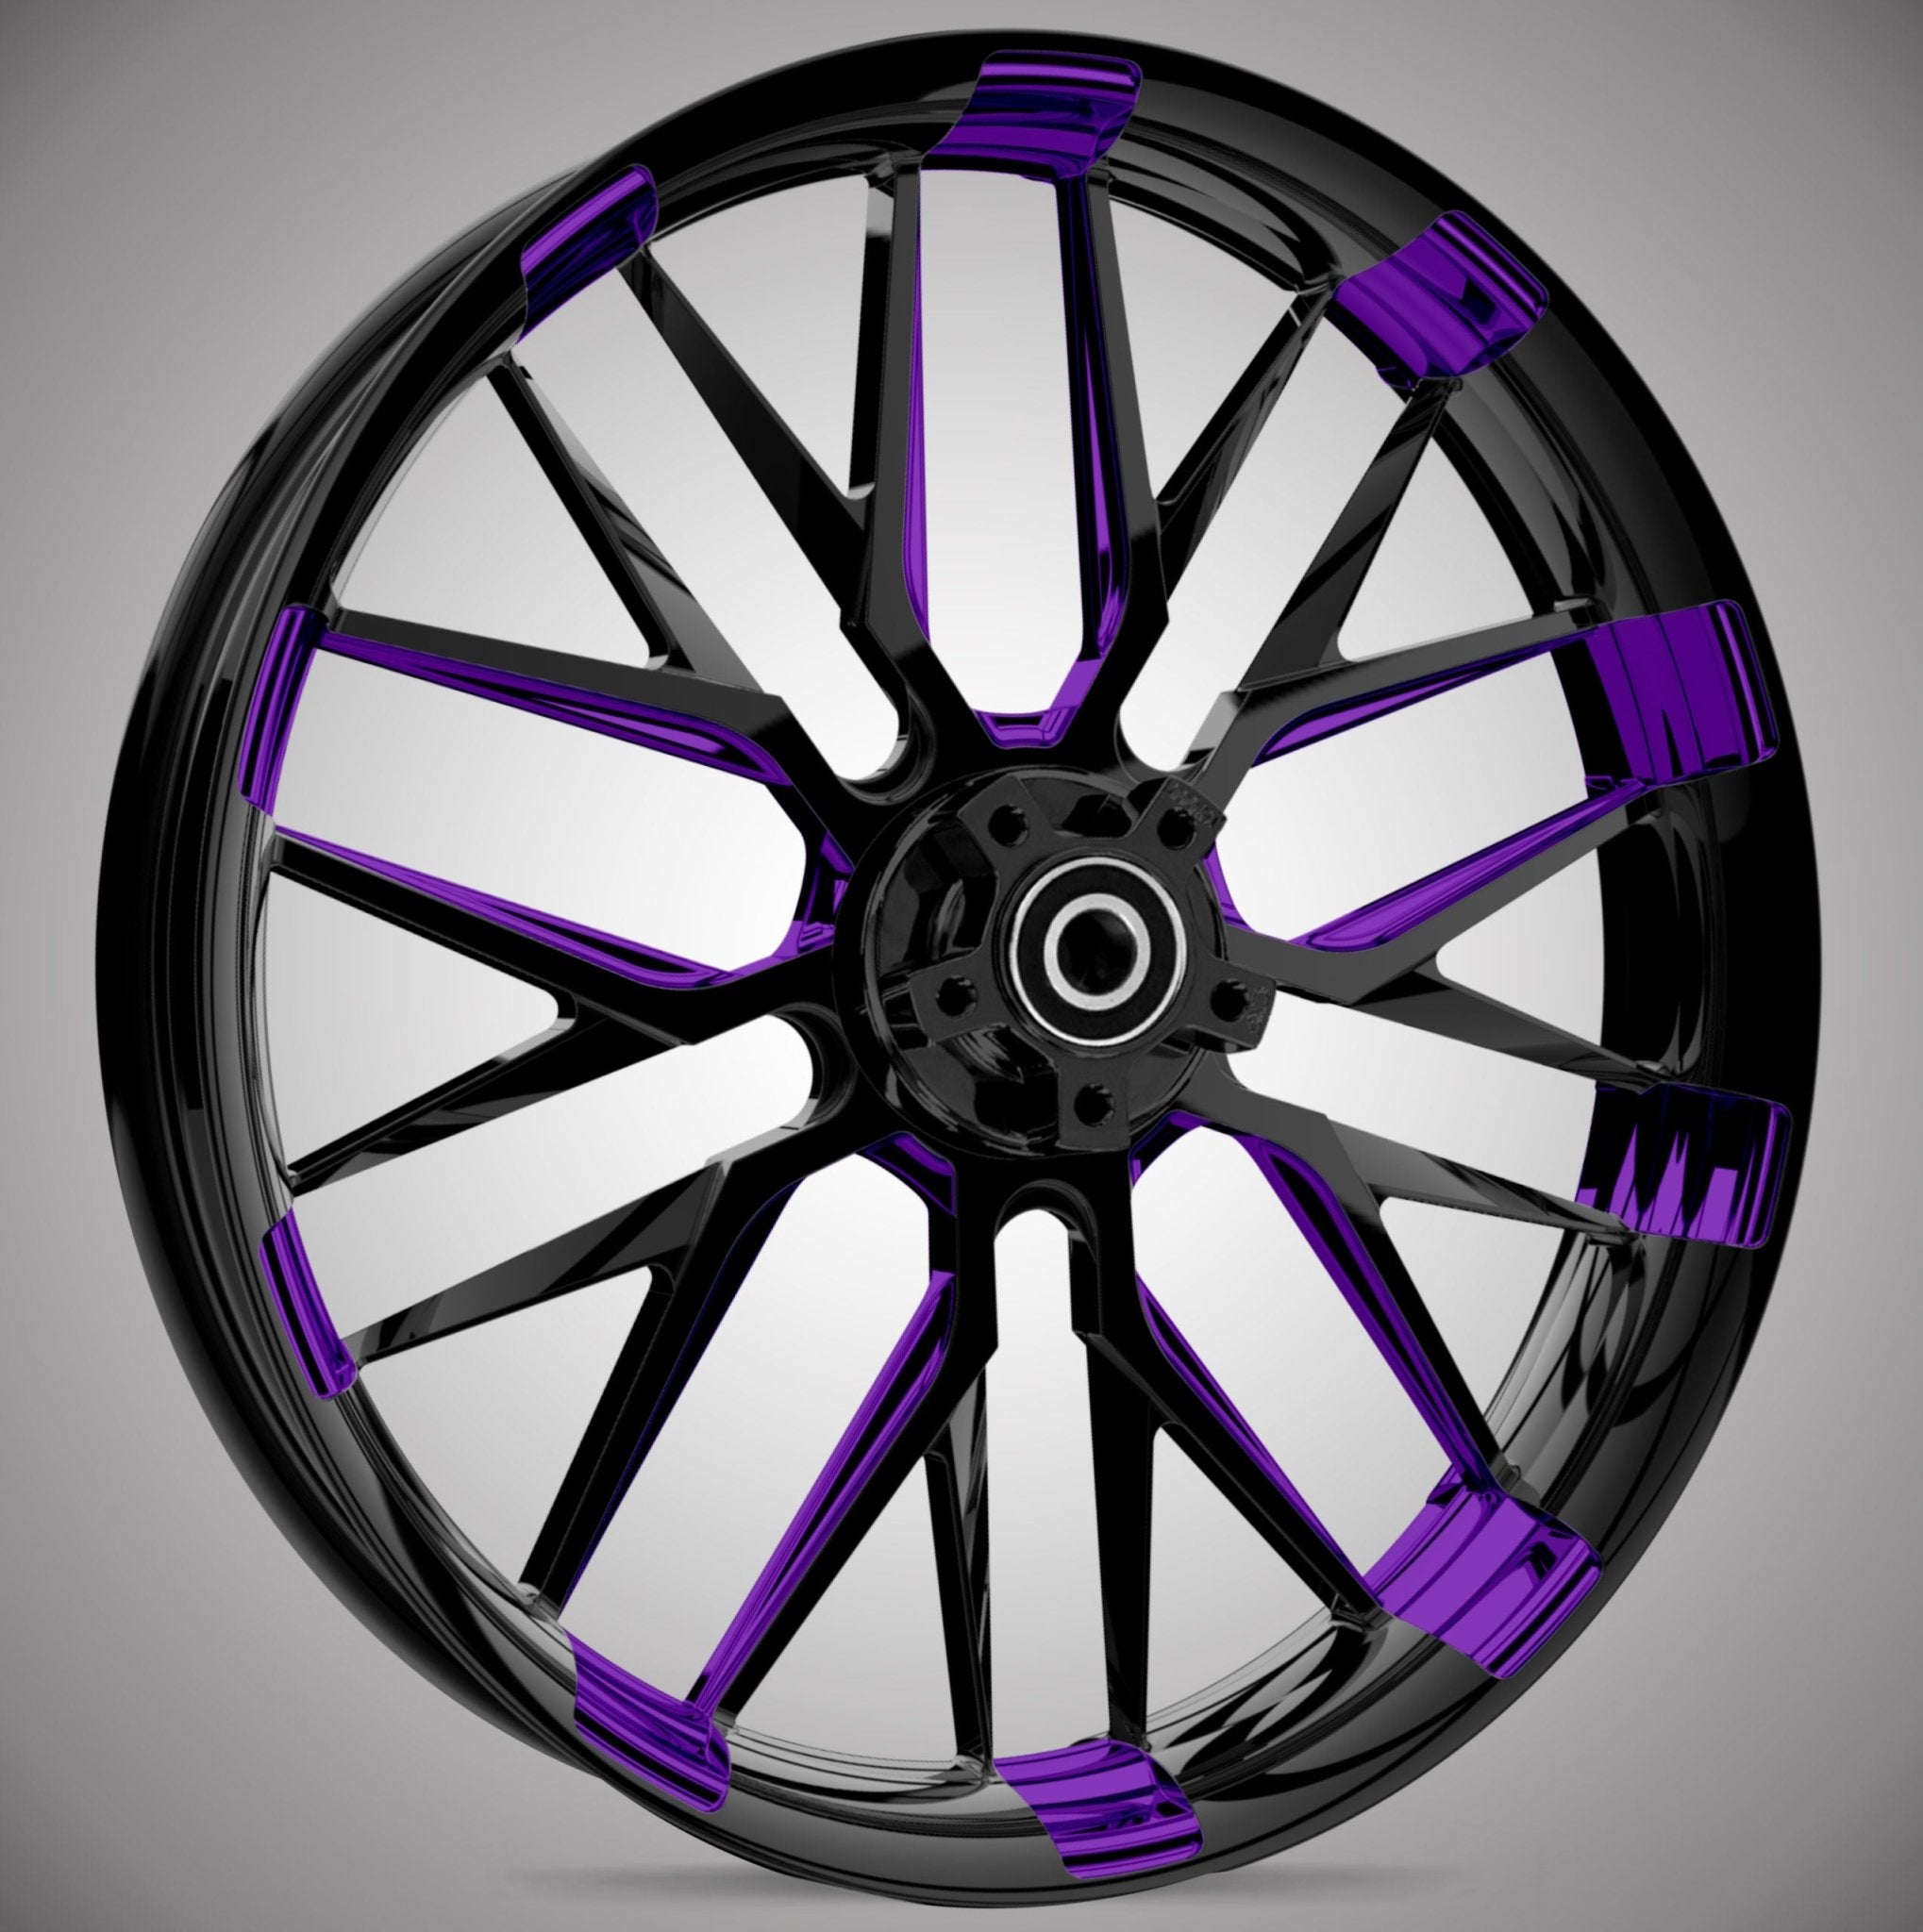 RYD Wheels Racelite - Insulator - Dyeline Series (Front) - Vehicle Parts & Accessories - Lucky Speed Shop - Lucky Speed Shop